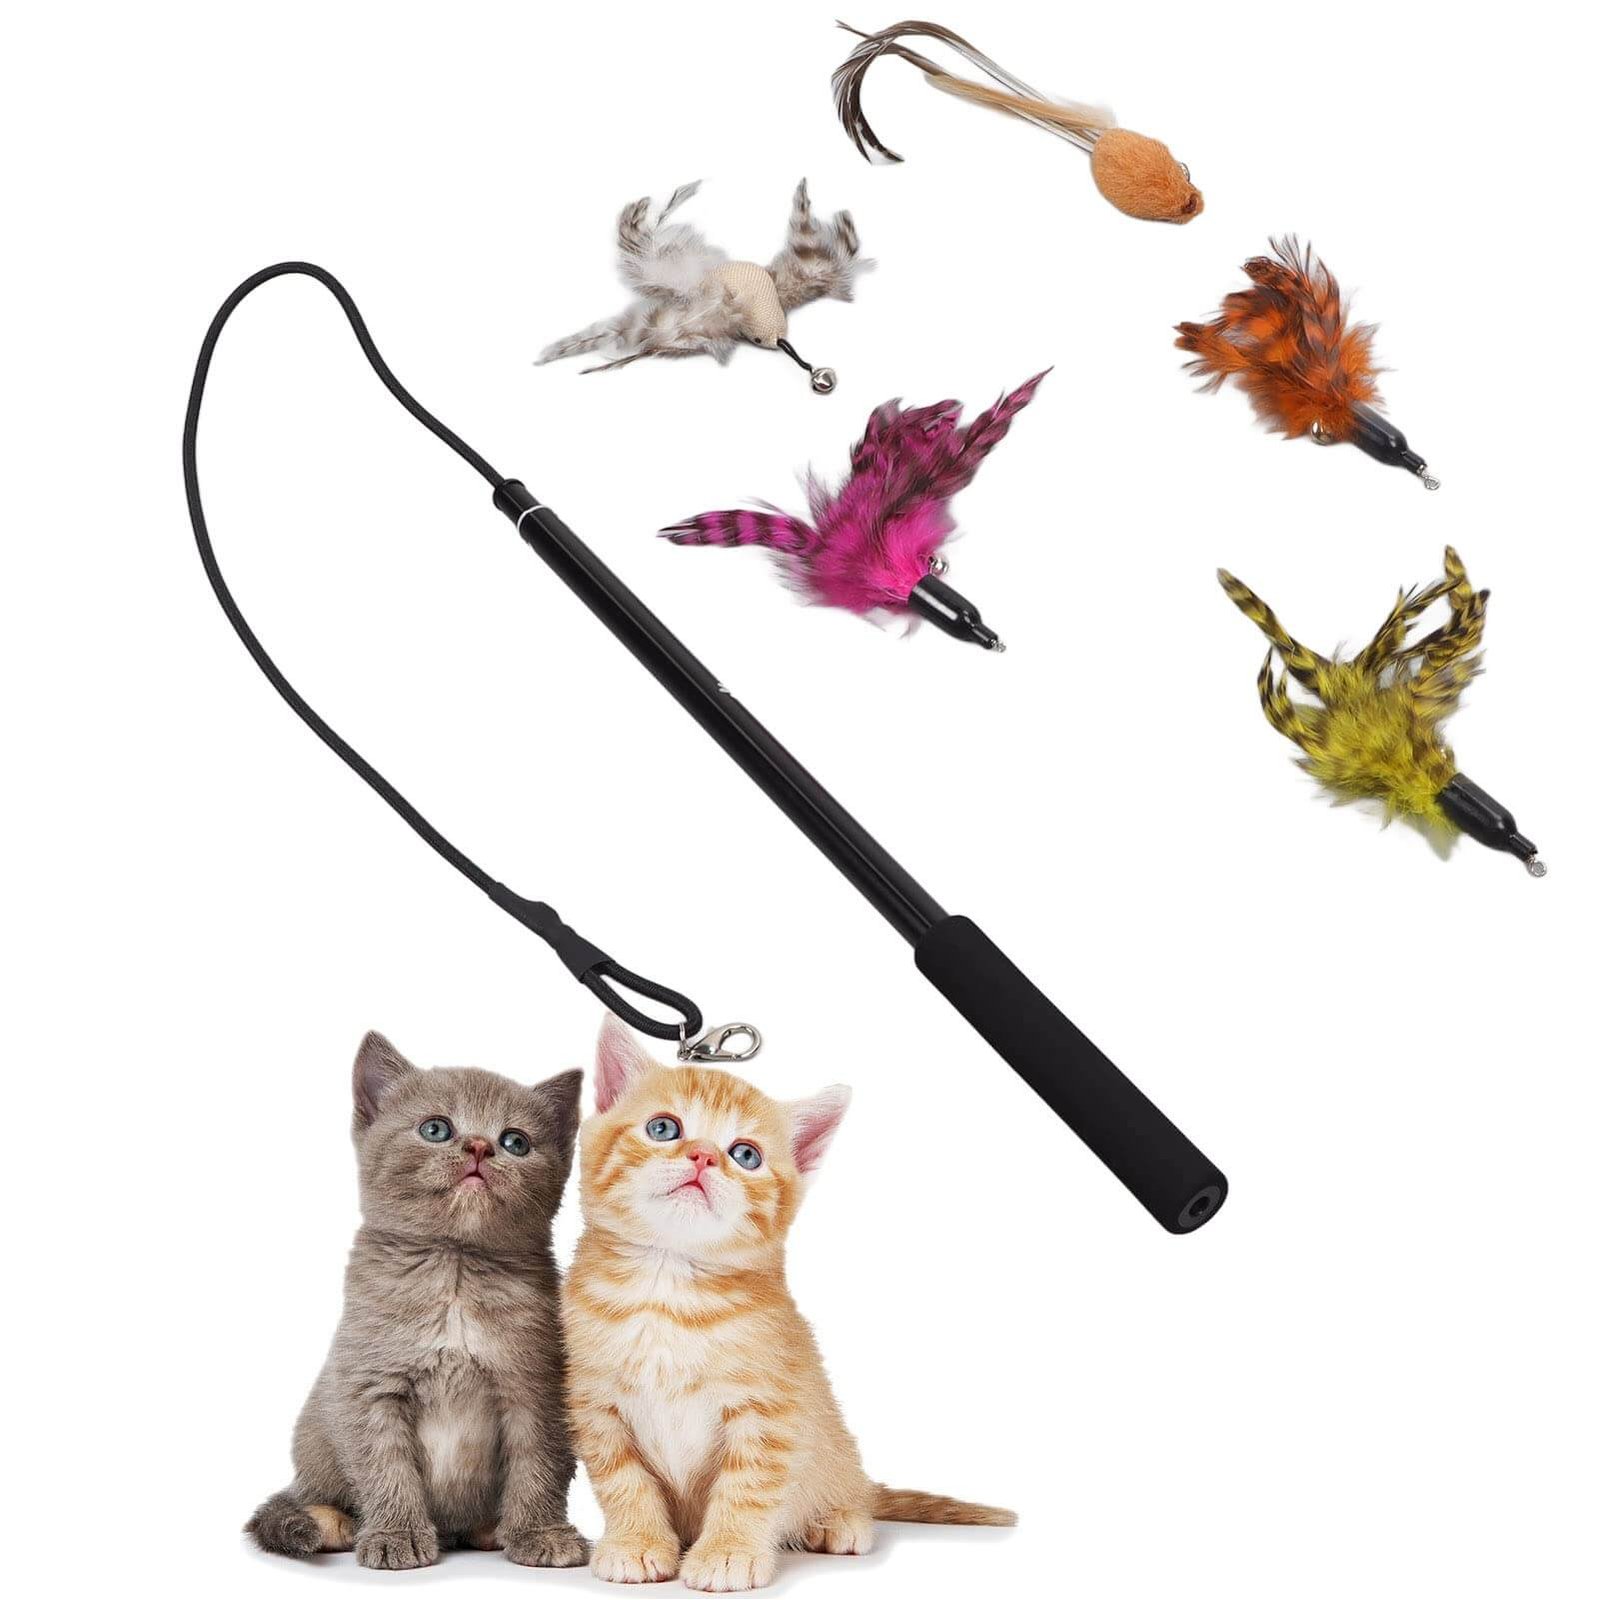 Pounce 'n Play Interactive Feather Wand for Siamese Cats